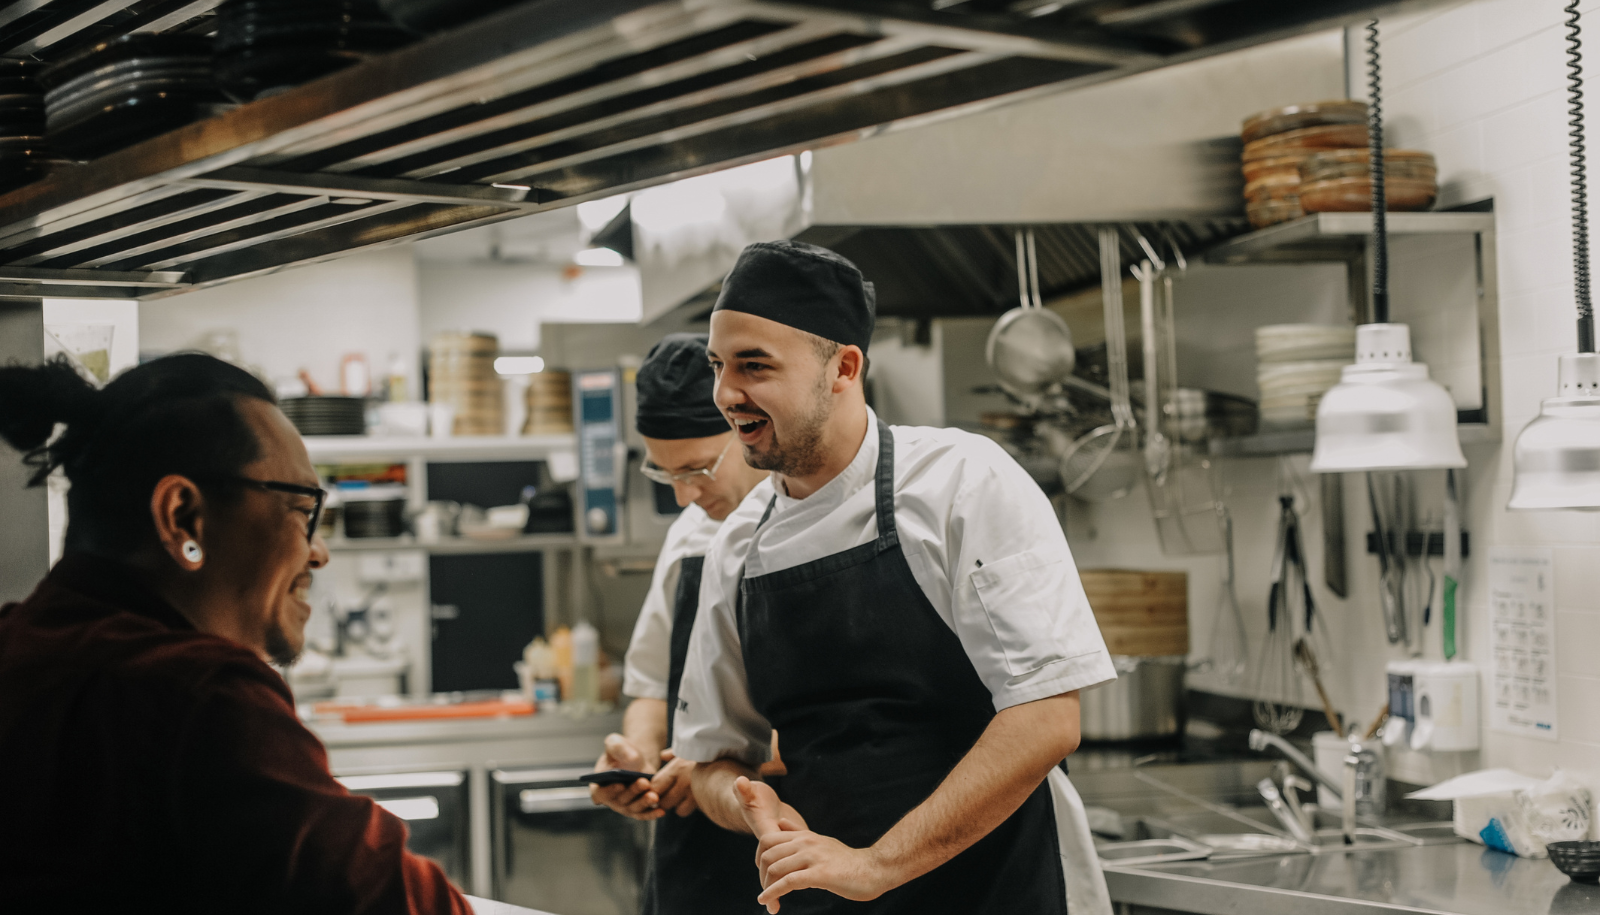 a man in a restaurant kitchen having a conversation with a customer